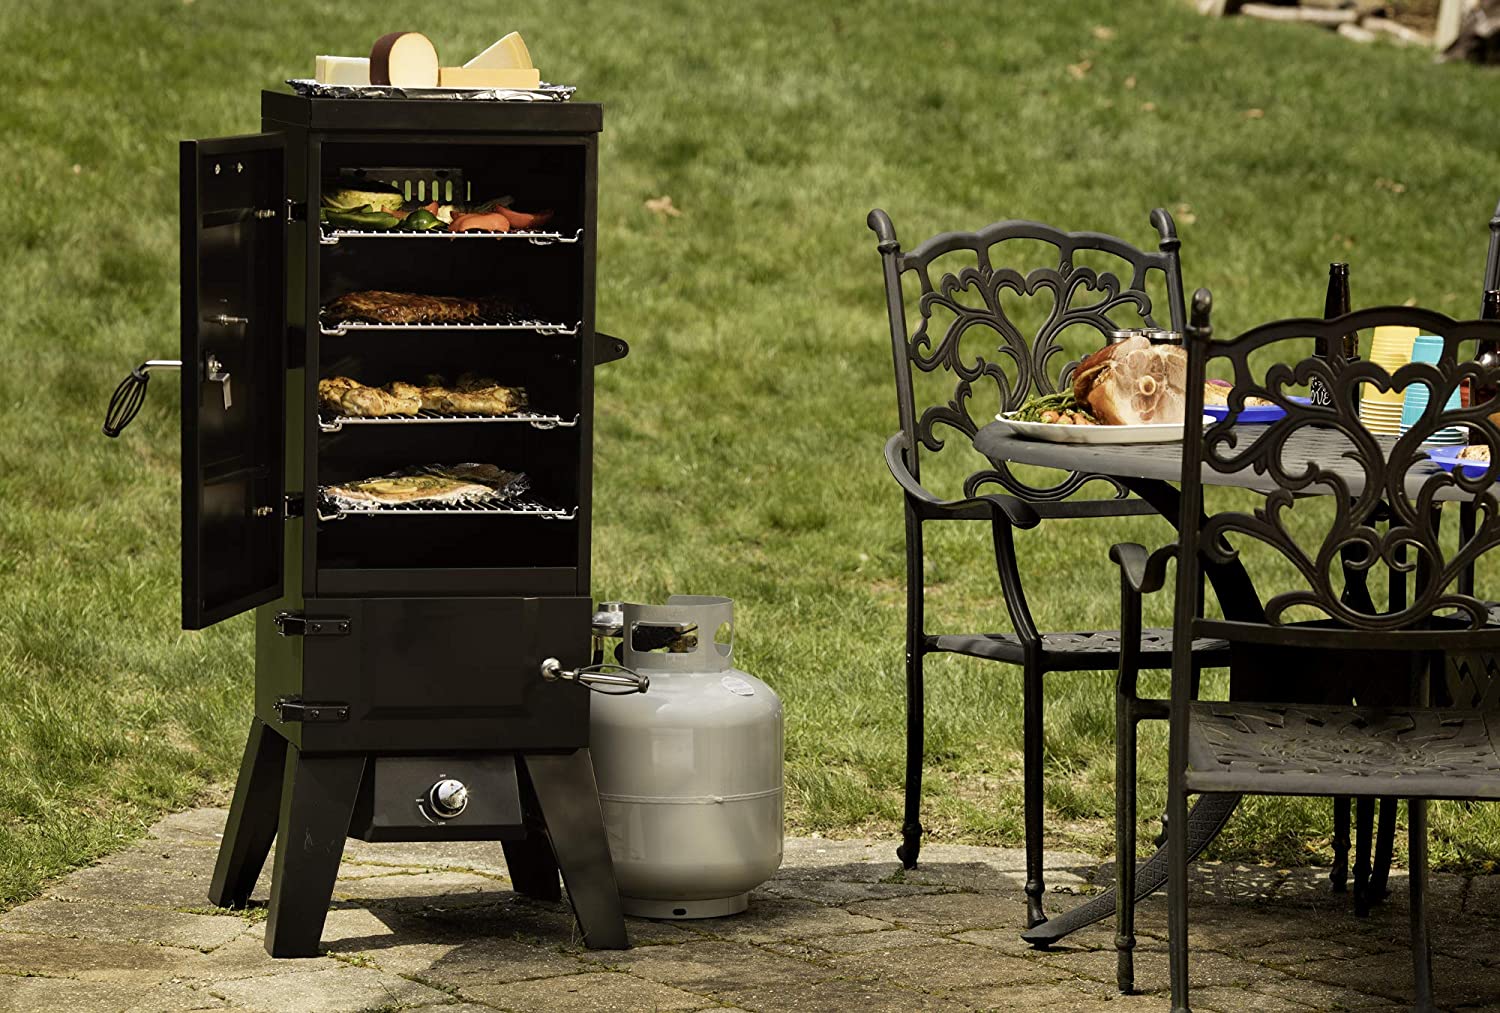 The best smoker for beginners option on an outdoor cement patio